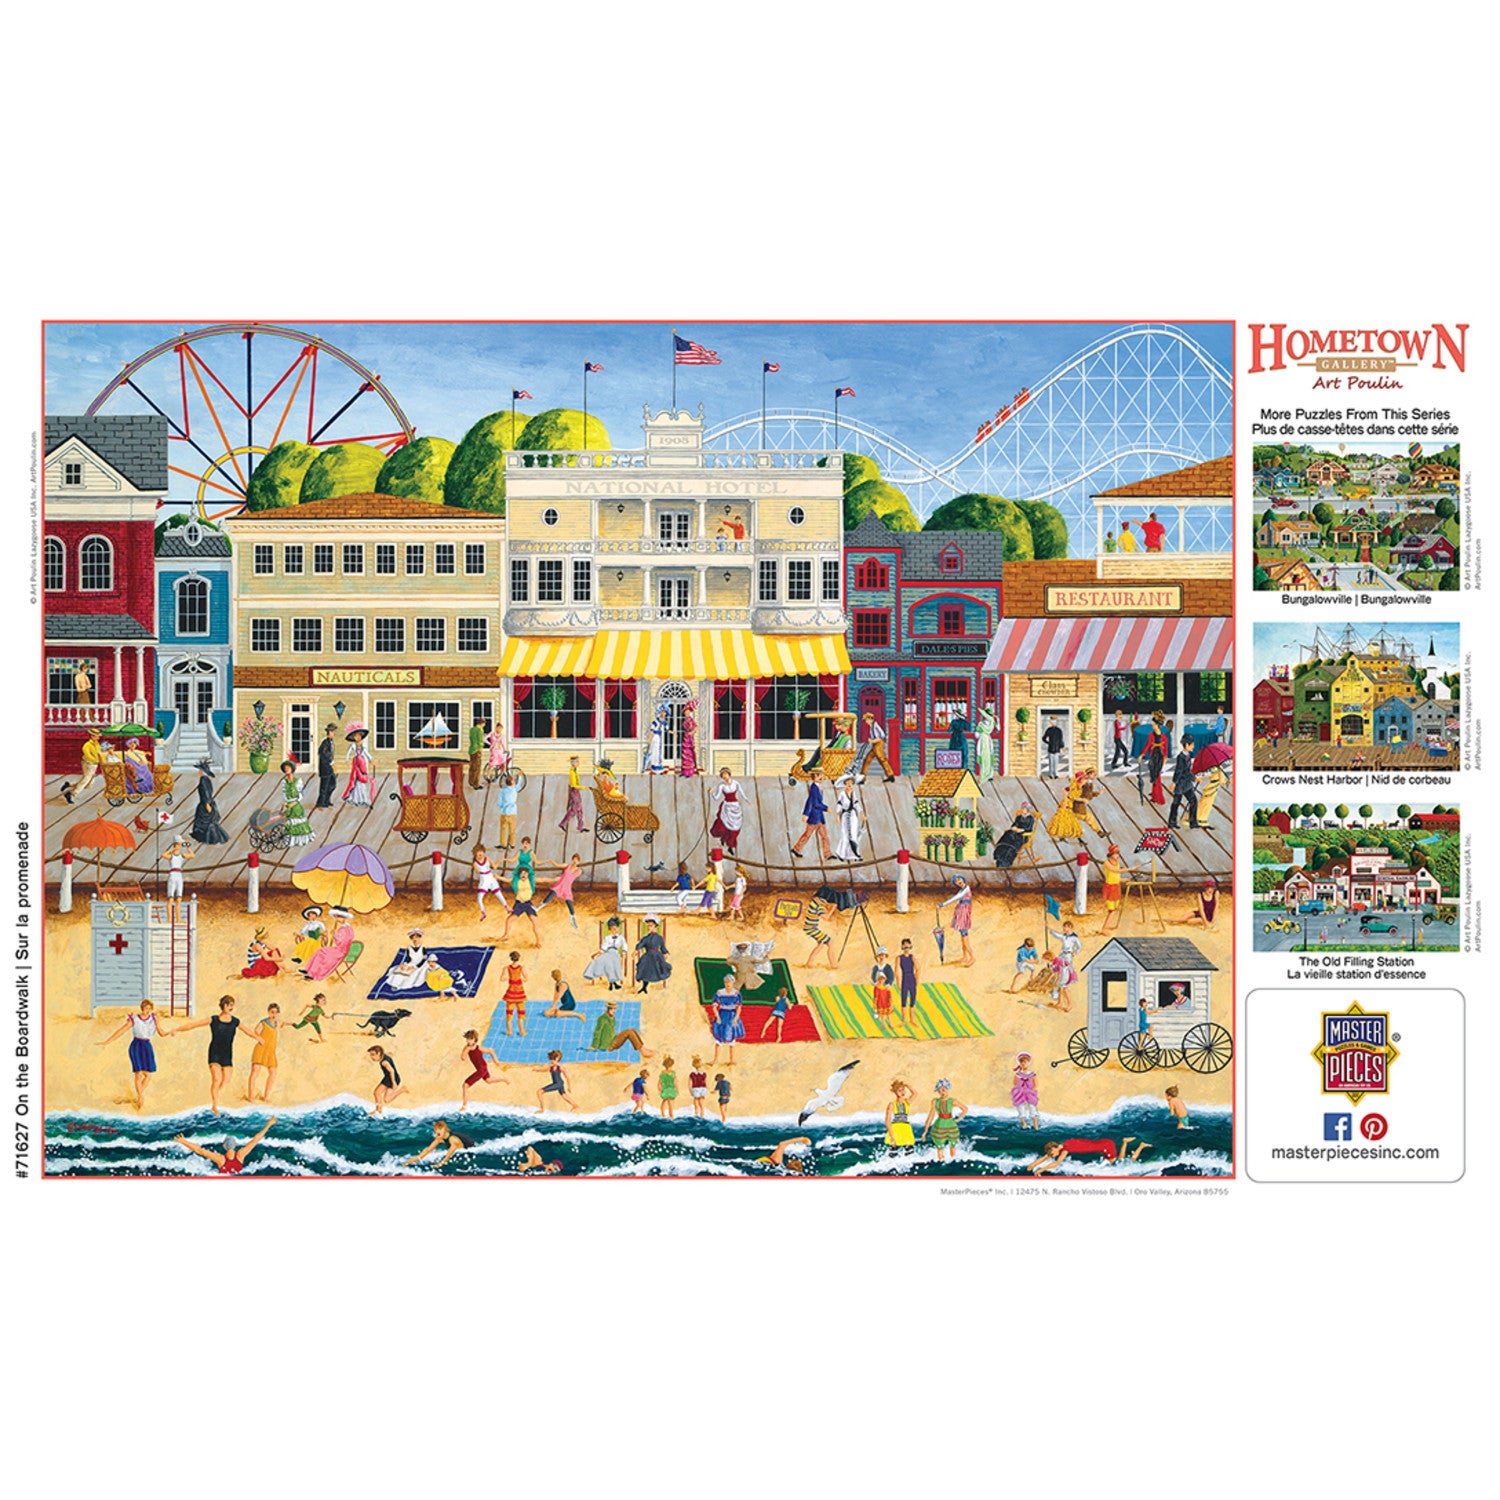 Hometown Gallery - On the Boardwalk 1000 Piece Puzzle